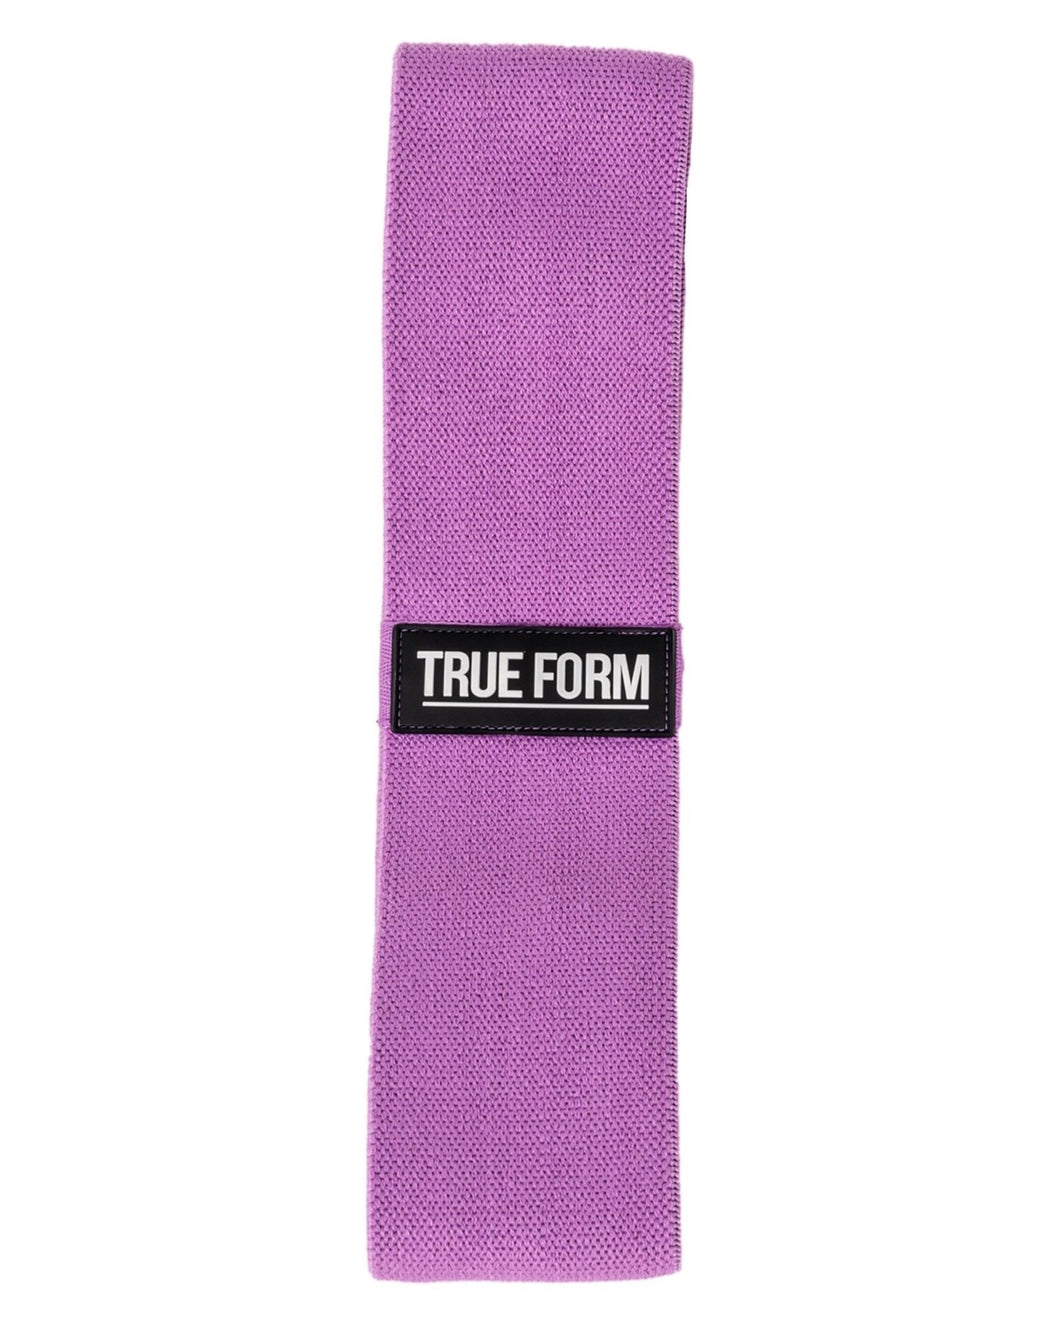 True Form UK heavy gym resistance bands for stretching exercise